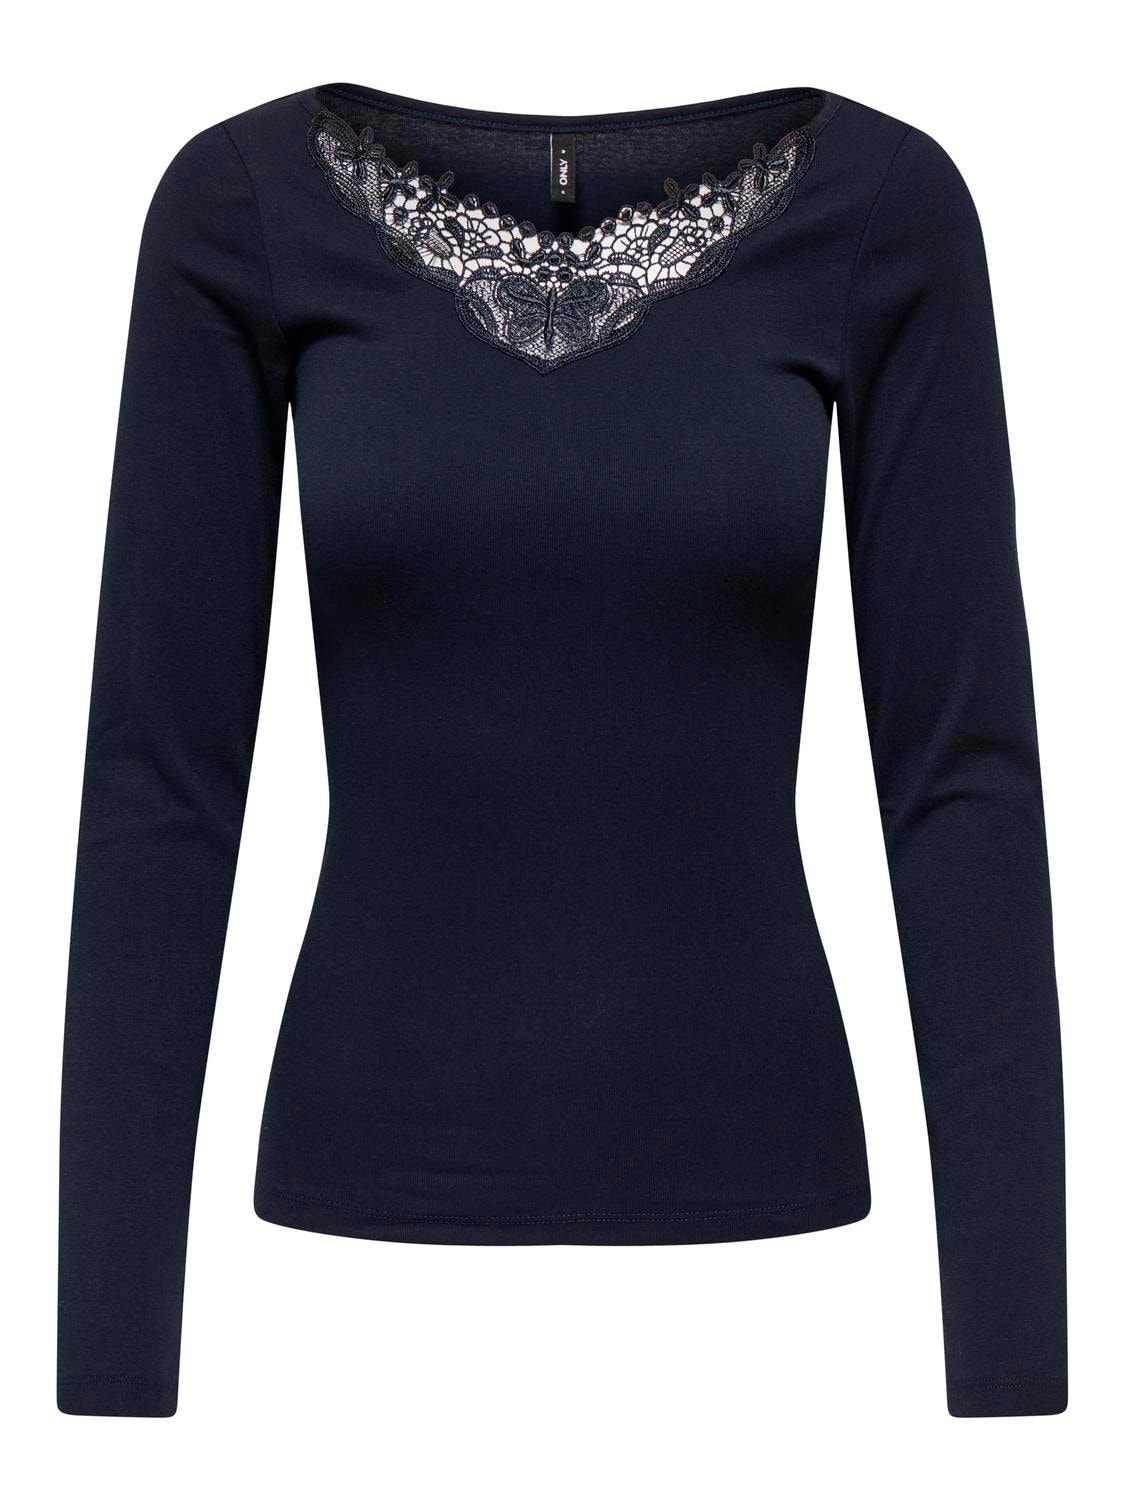 ONLY Long sleeved top with lace neck -Dress Blues - 15302894